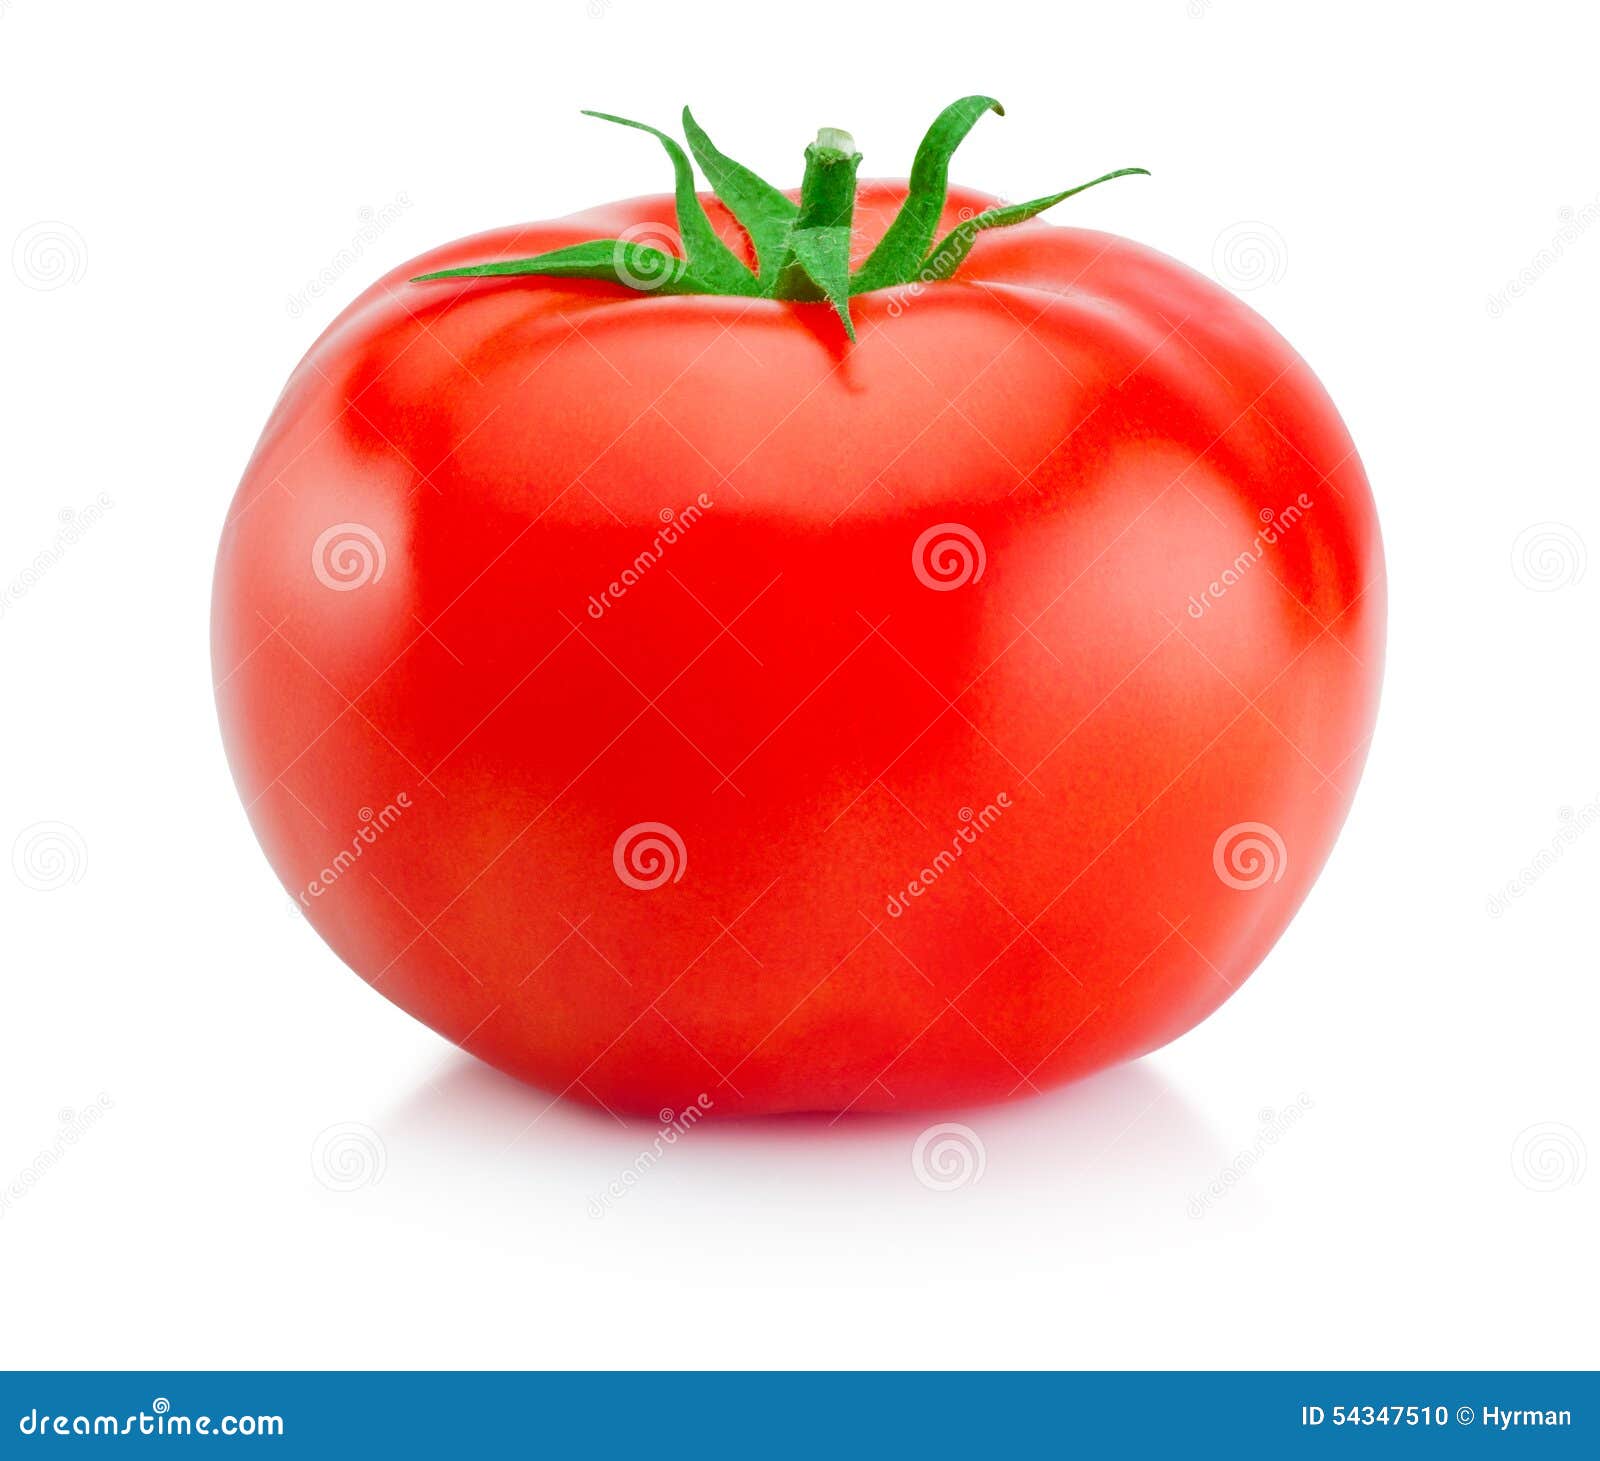 one juicy red tomato  on white background